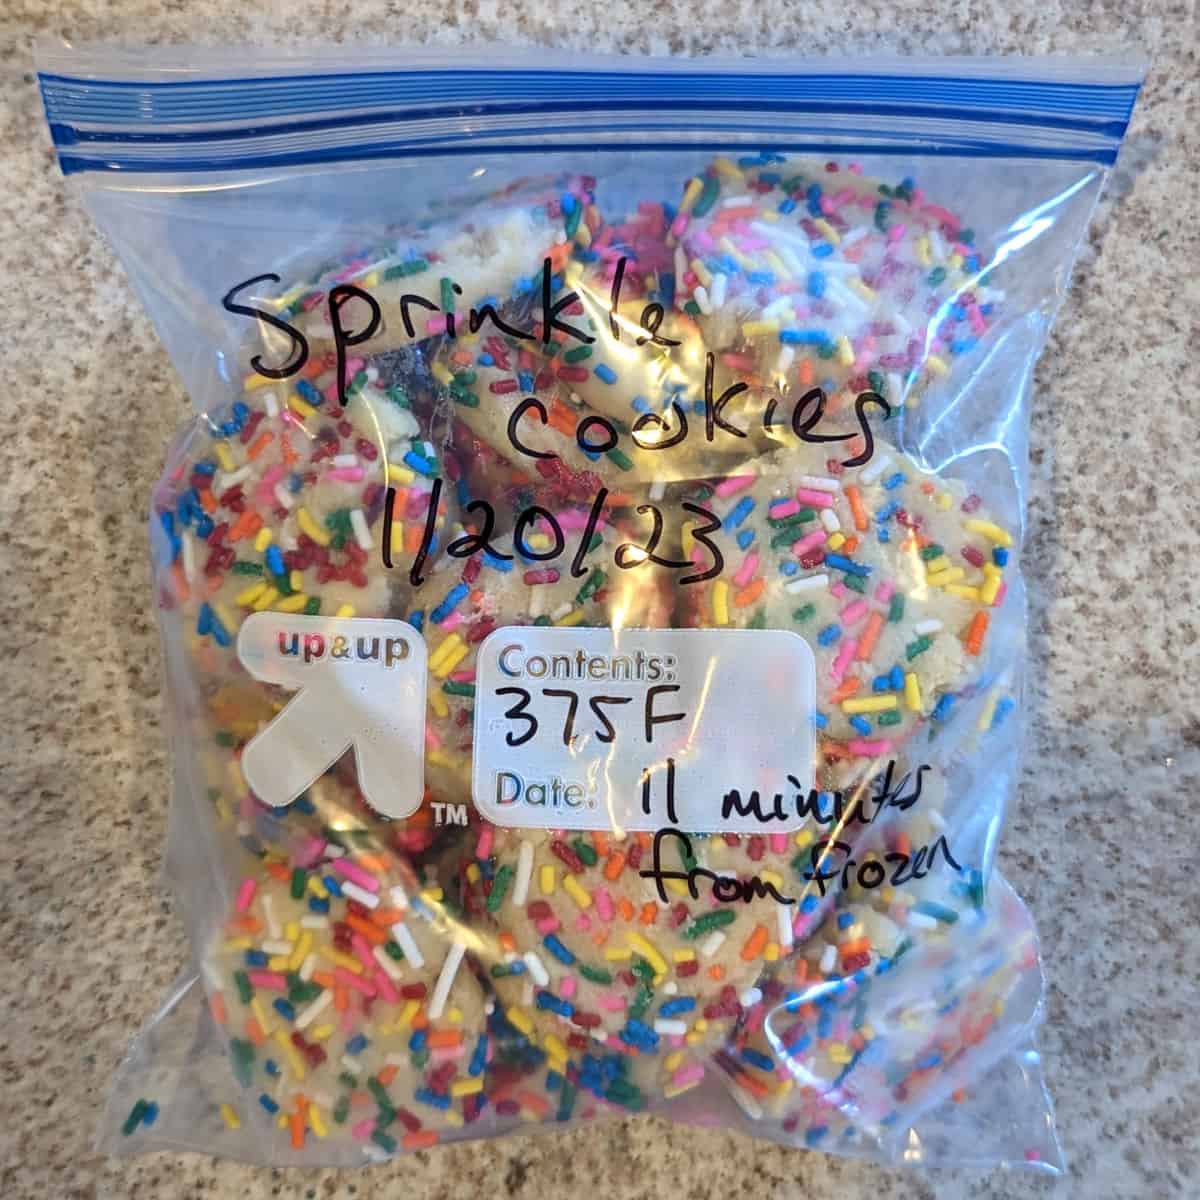 frozen sprinkle cookies in a labeled bag